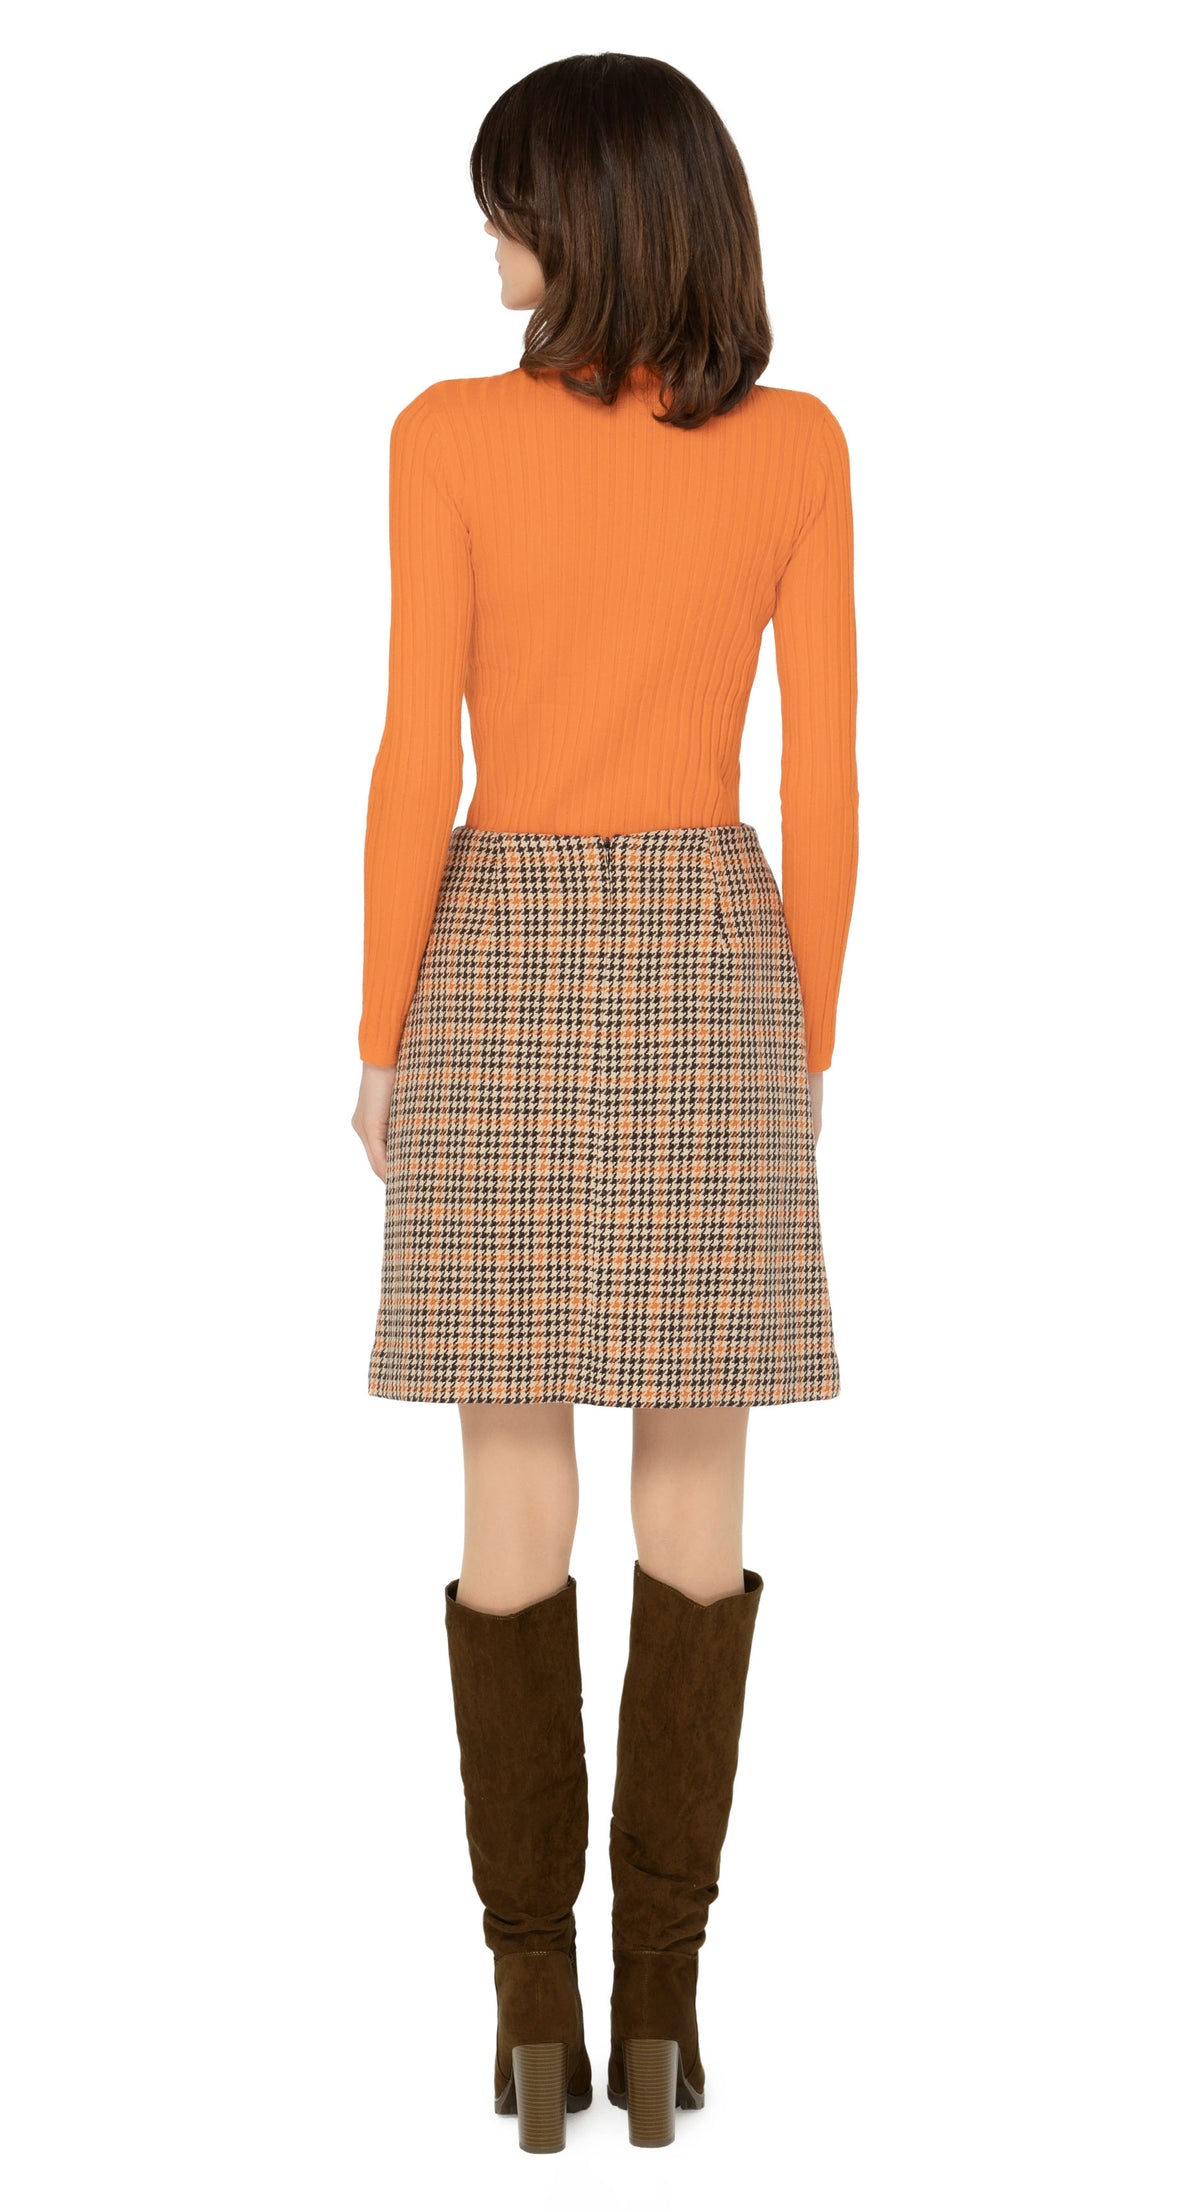 Limited edition, classic fitted, medium weight Italian dogtooth, waist hugging skirt. Warm tones in the weave encourage versatility when dressing up with heels or down with flats or kicks. Worn here with a turtleneck which is sold separately. Please inquire to shop the look.